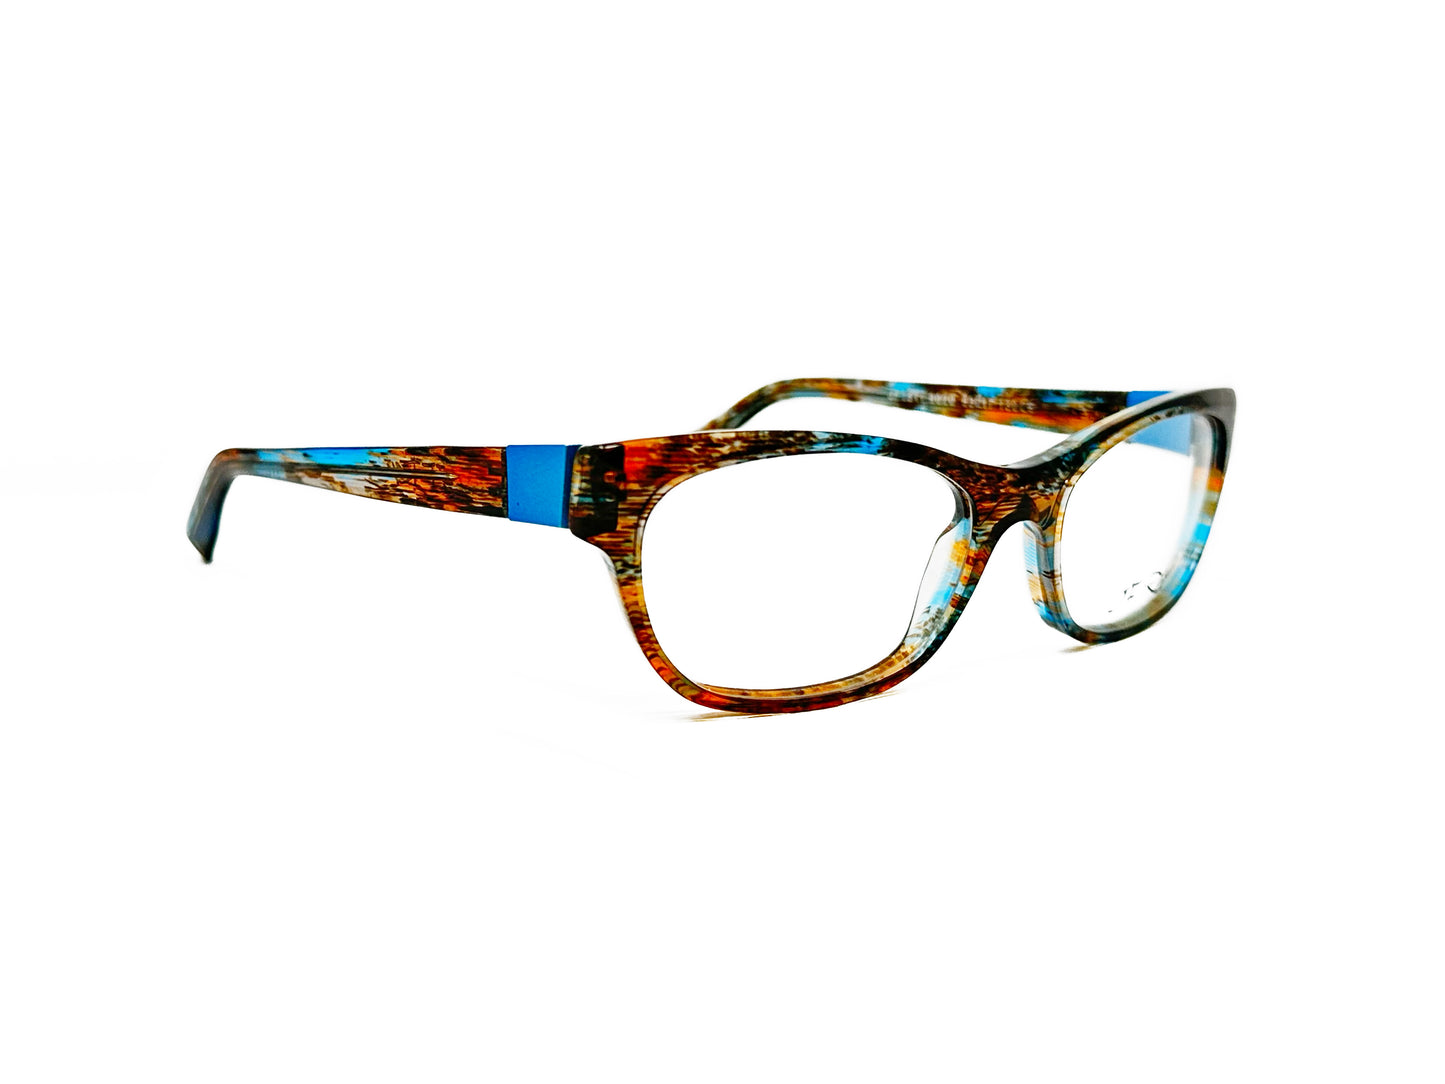 JF Rey rectangular acetate optical frame with upward lift. Model: JF1311. Color: 9020 - Brown and turquoise pattern. Side view.